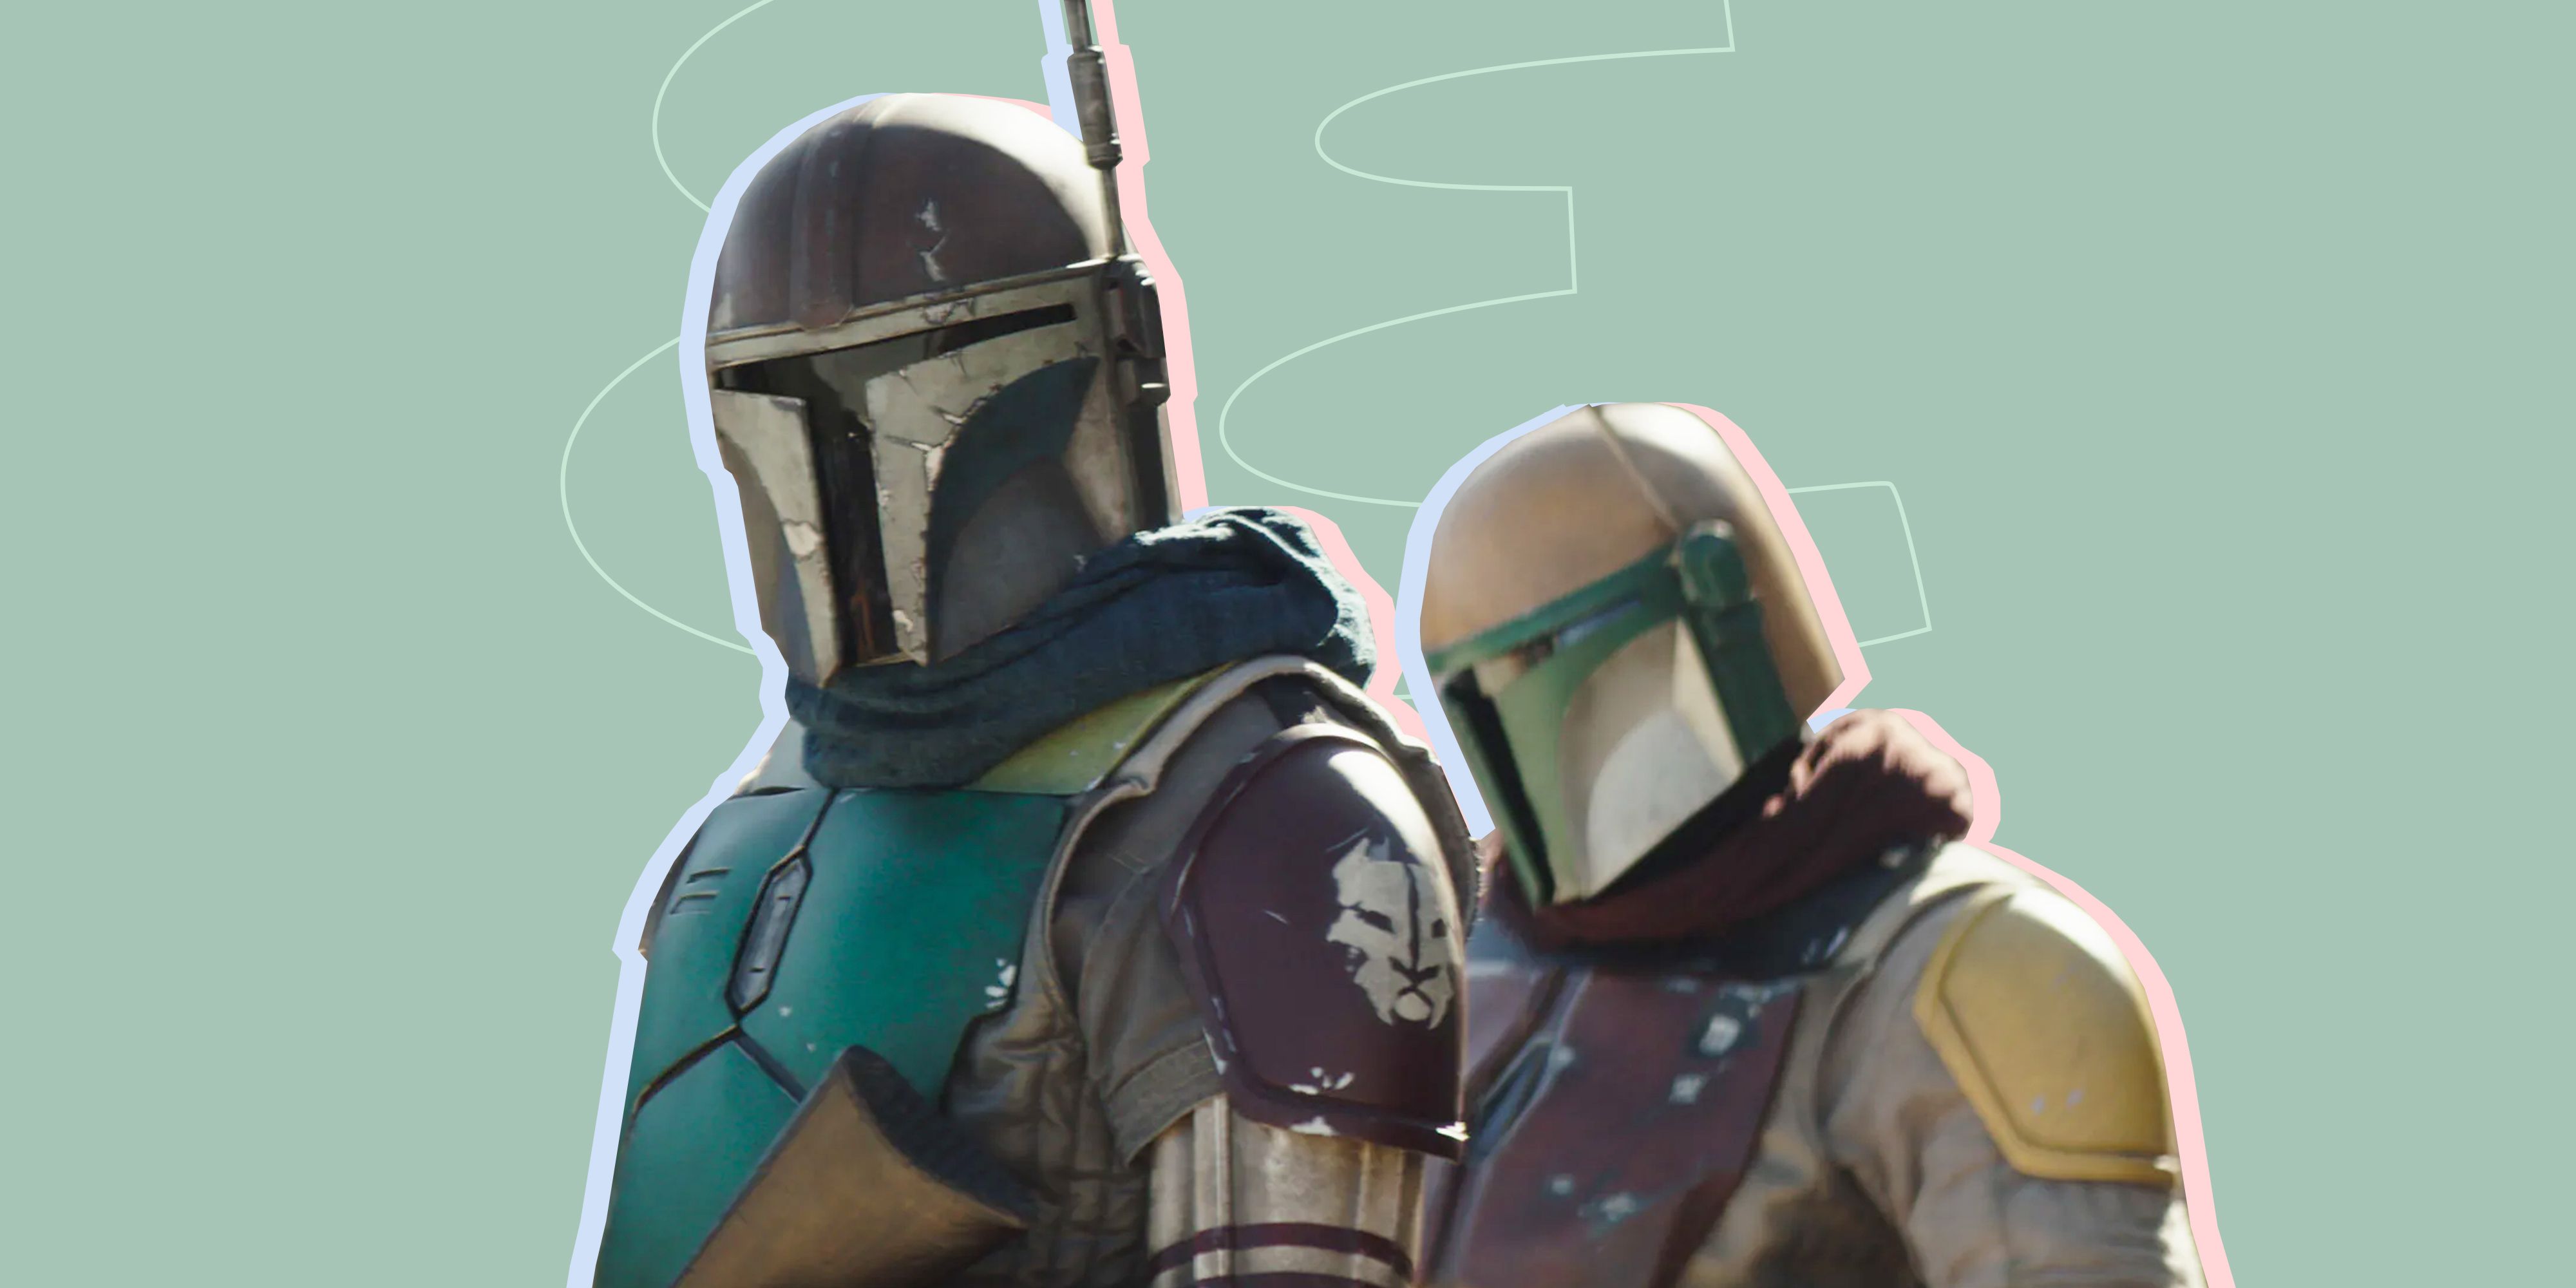 7 things to know about The Mandalorian season 3 before you watch